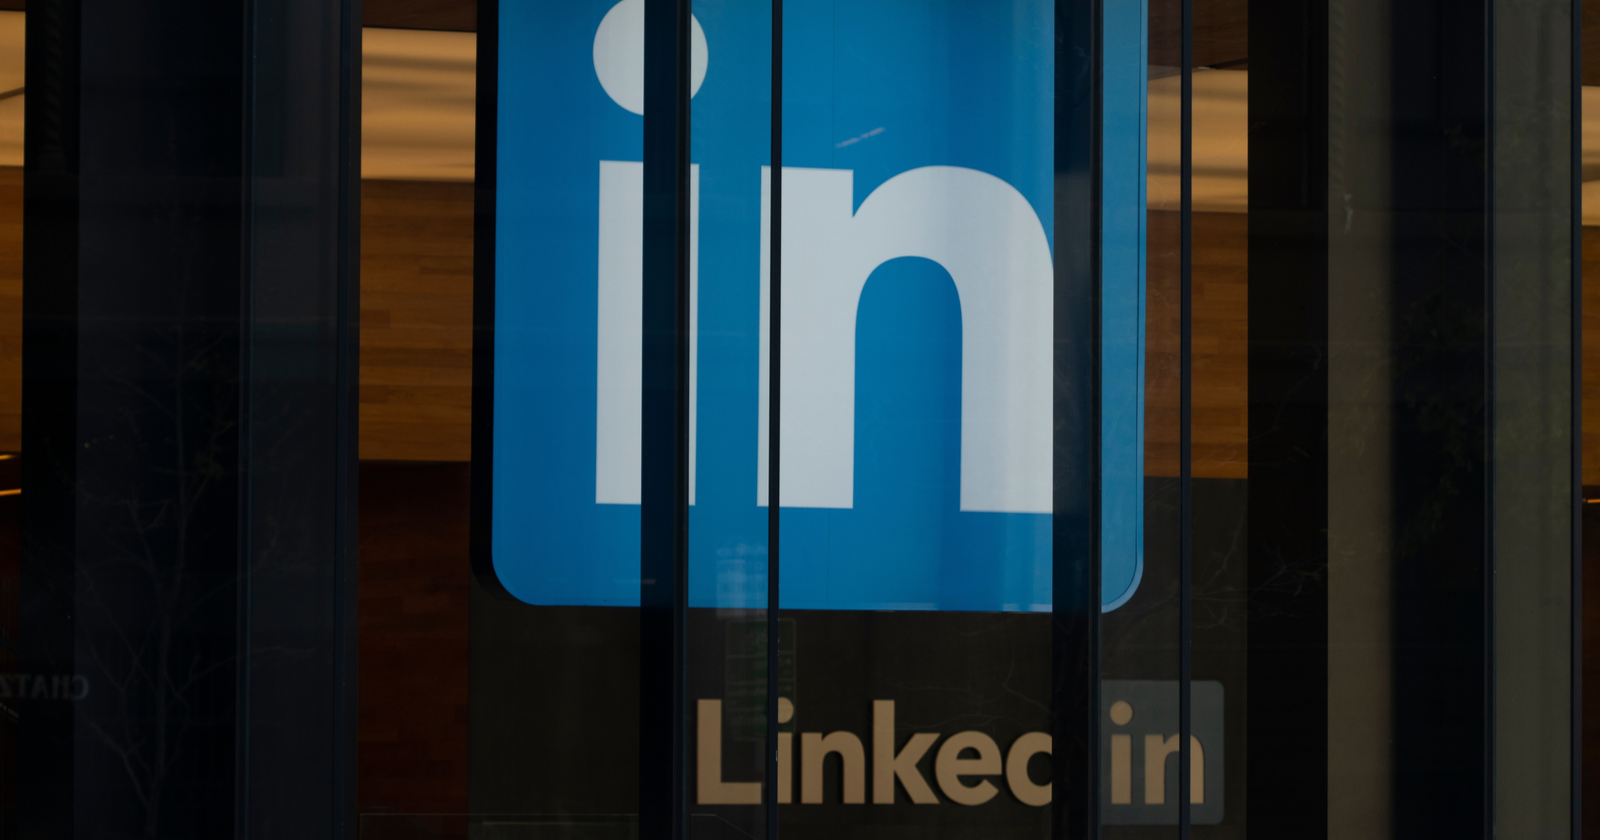 LinkedIn Updates Include Improvements To Search Results via @sejournal, @BrianFr07823616